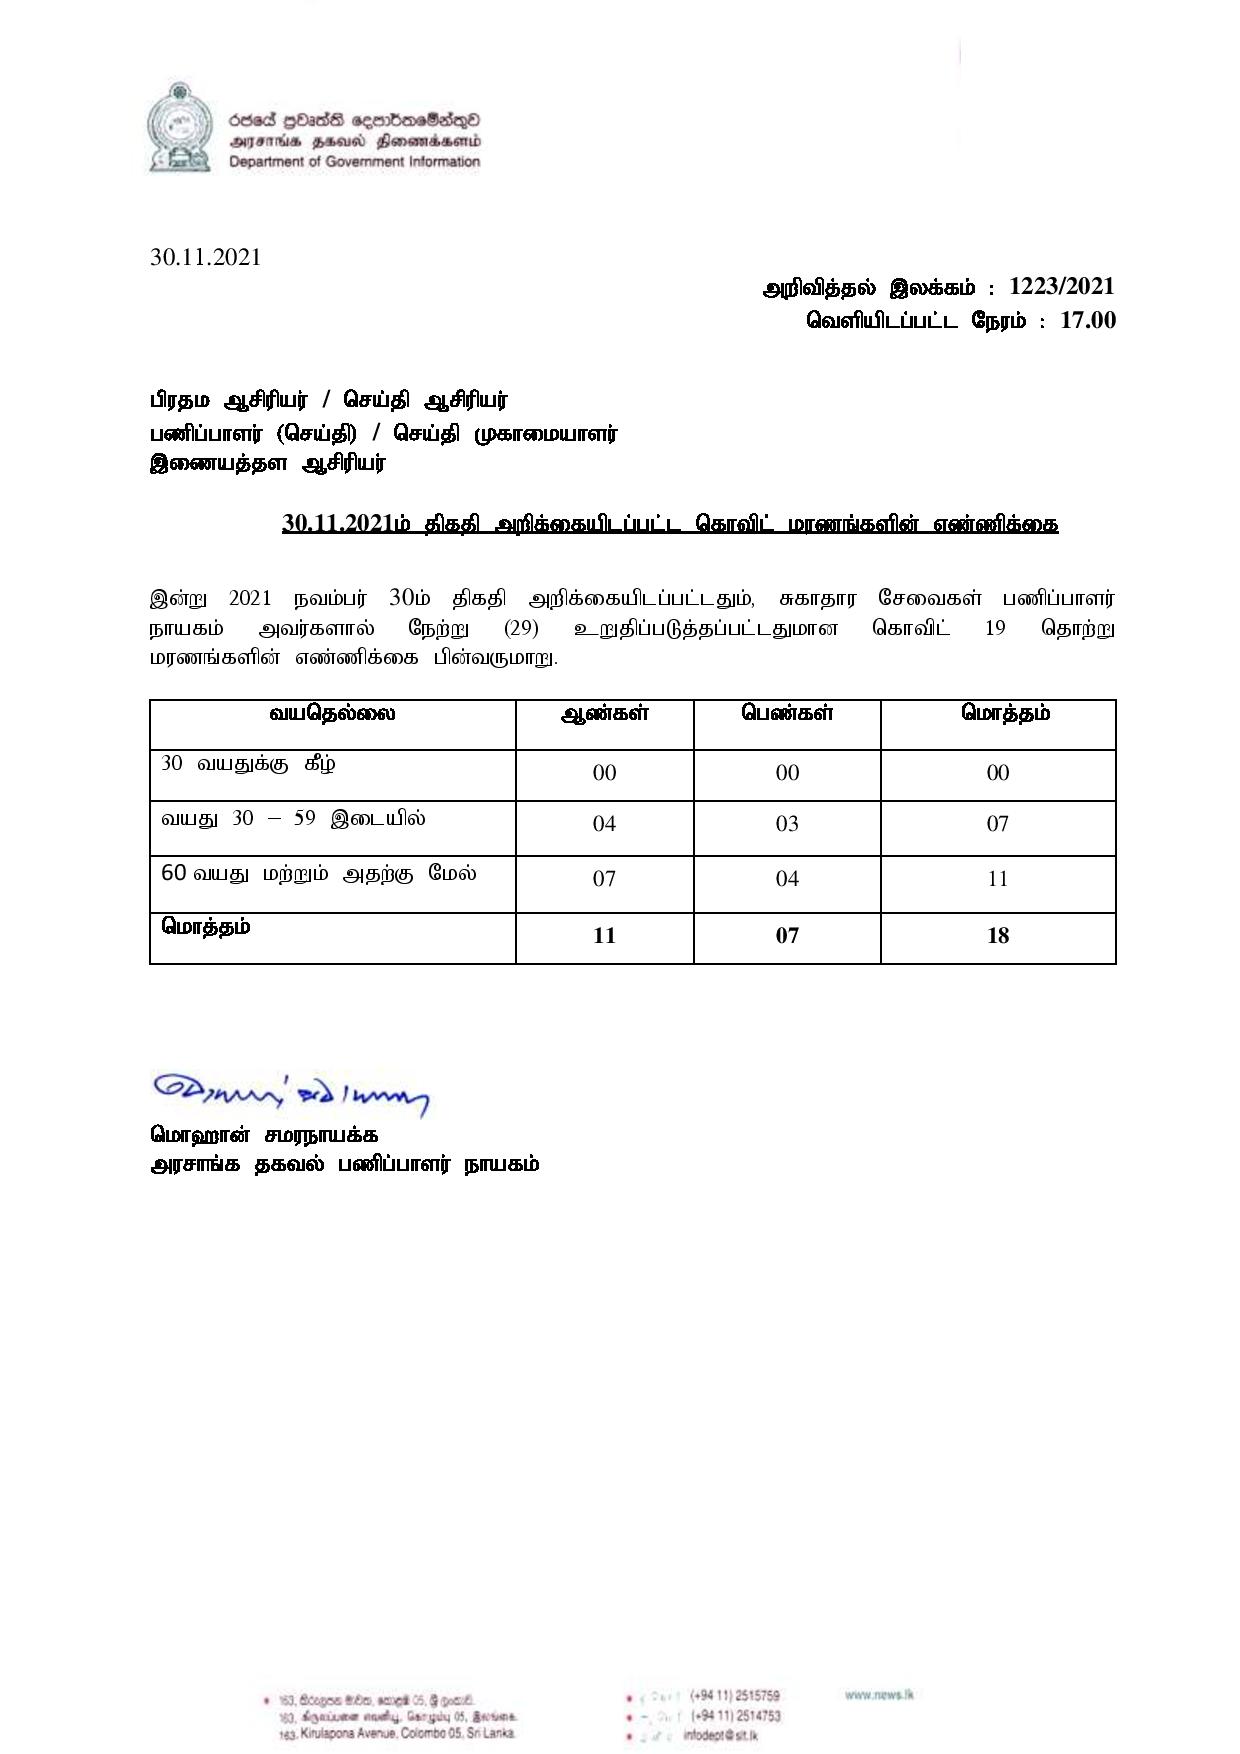 Release No 1223 Tamil page 001